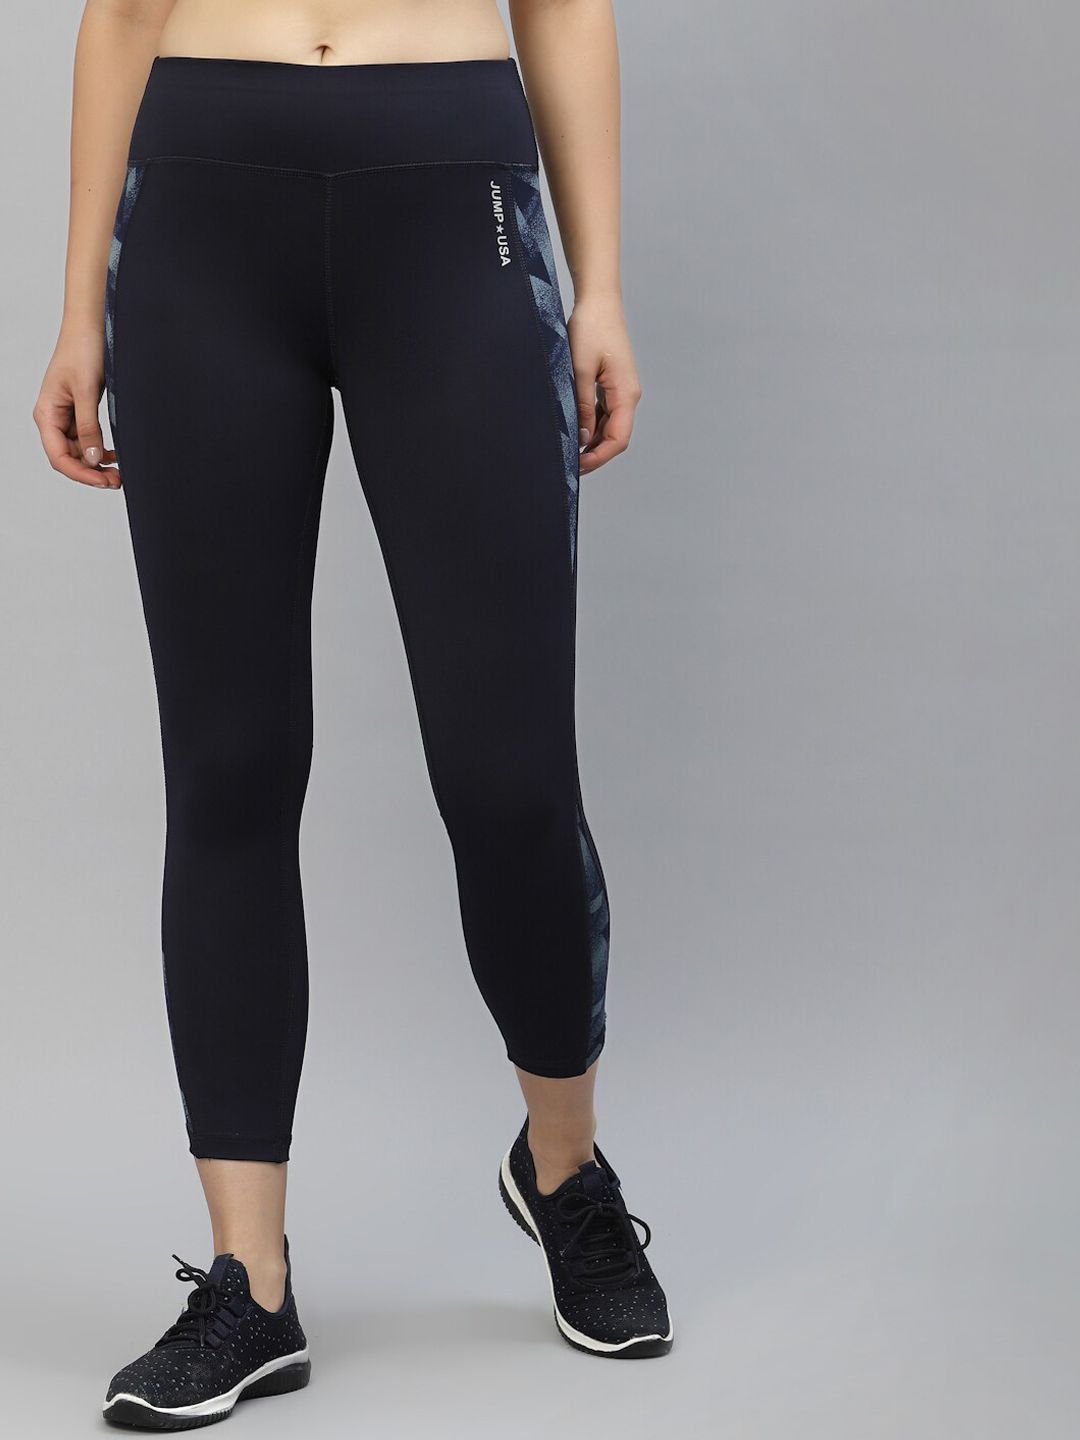 JUMP USA Women Black Solid Rapid-Dry Slim Fit Running Tights Price in India